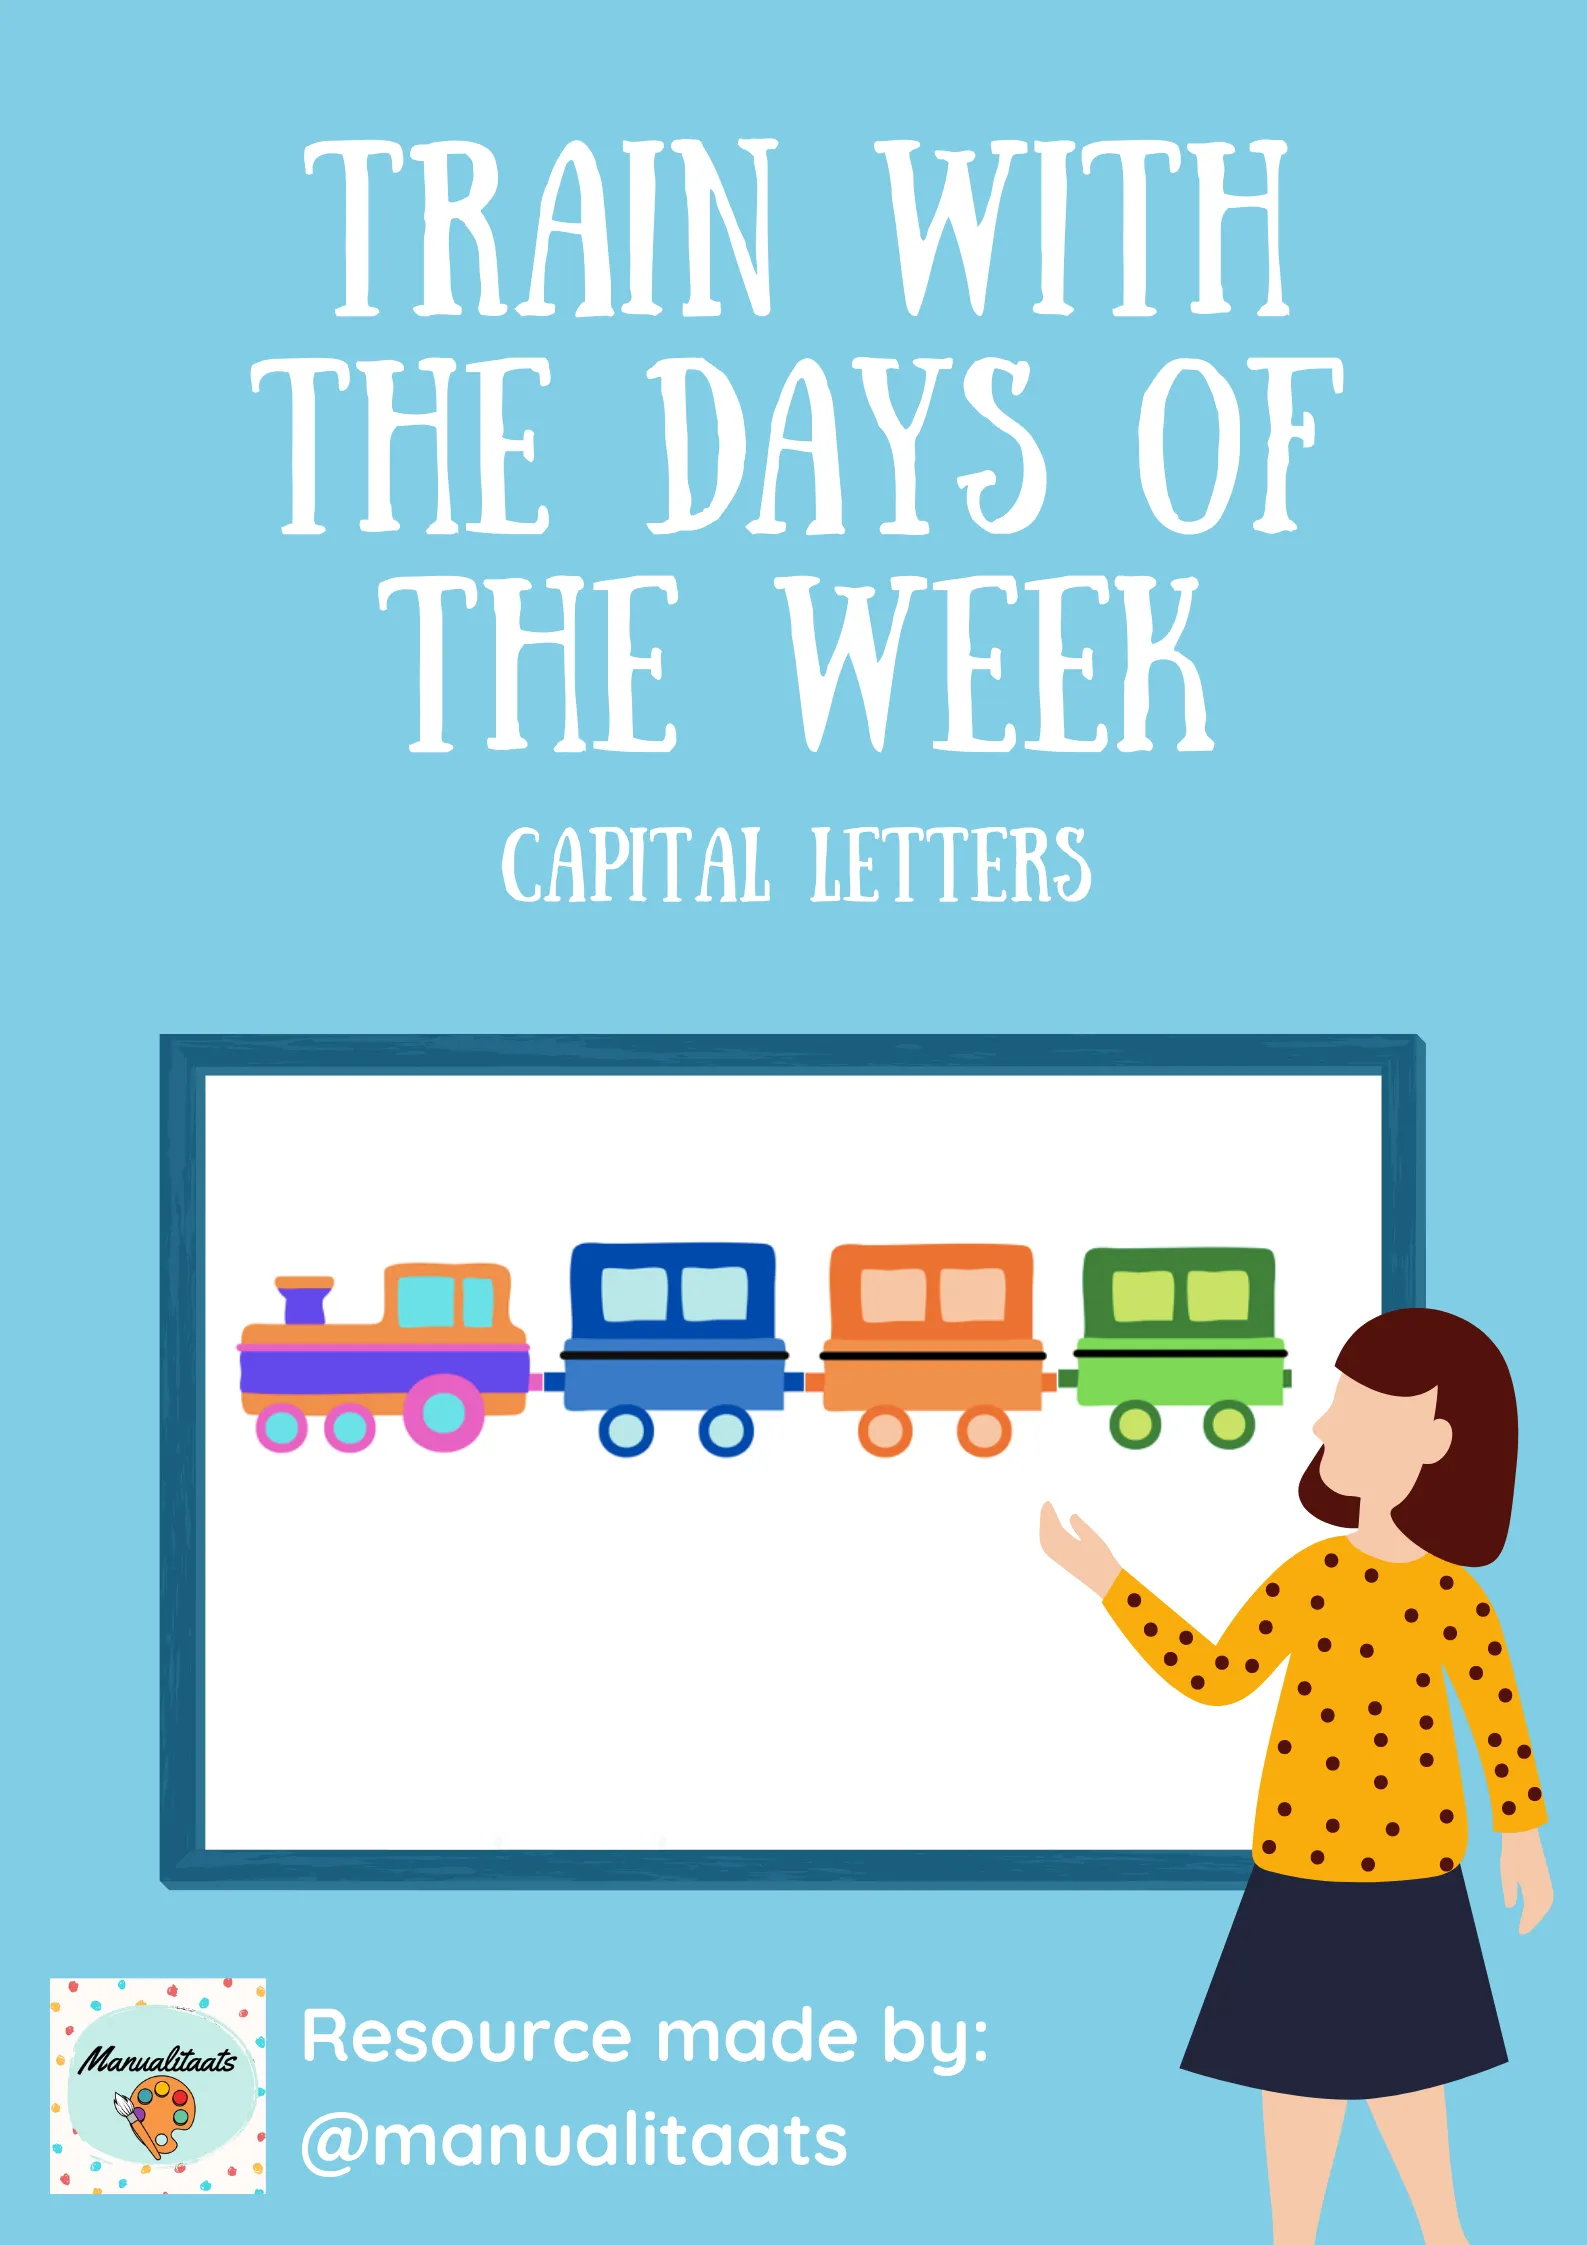 Train with the days of the week (CAPITAL LETTERS)